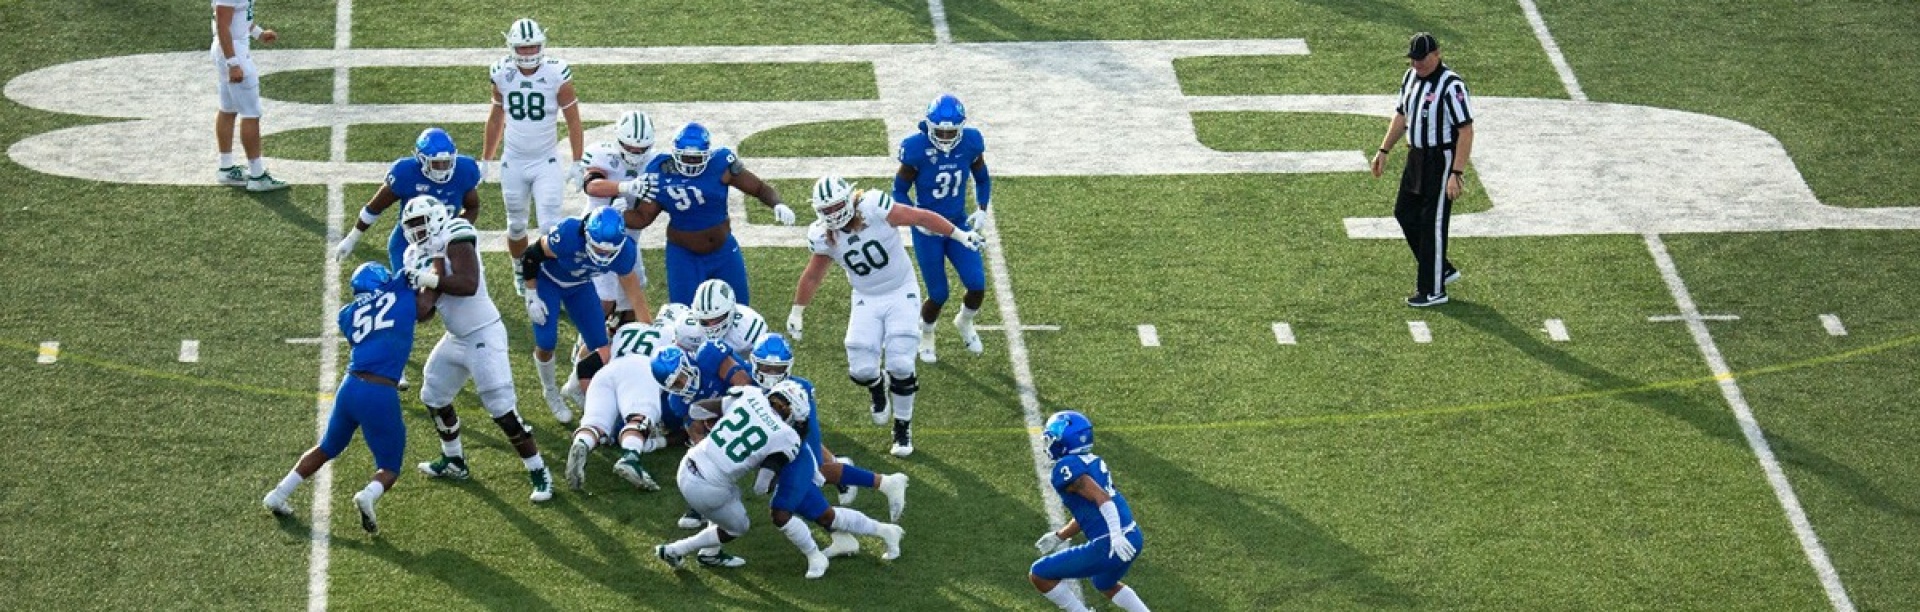 Fans, alumni, students and the UB community gather for the homecoming football game, as UB played the Ohio Bobcats on October 5, 2019. Photographer: Meredith Forrest Kulwicki. 